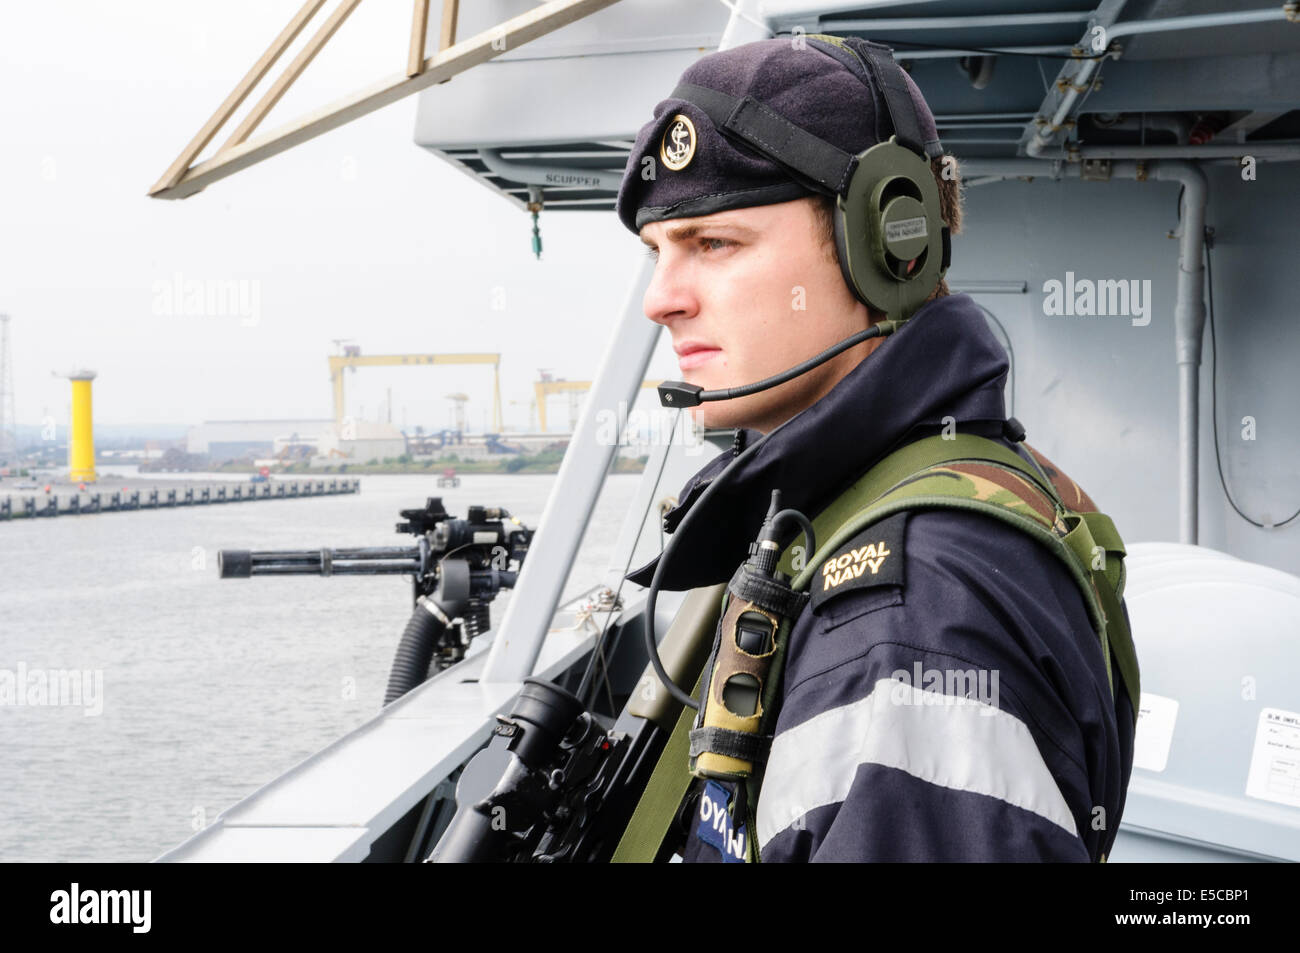 Belfast, Northern Ireland. 26/07/2014 - Sailor armed with a SA-80 assault rifle stands guard on the Type 45 destroyer HMS Duncan, as she arrives into her adopted city of Belfast for a three day visit. Credit:  Stephen Barnes/Alamy Live News Stock Photo